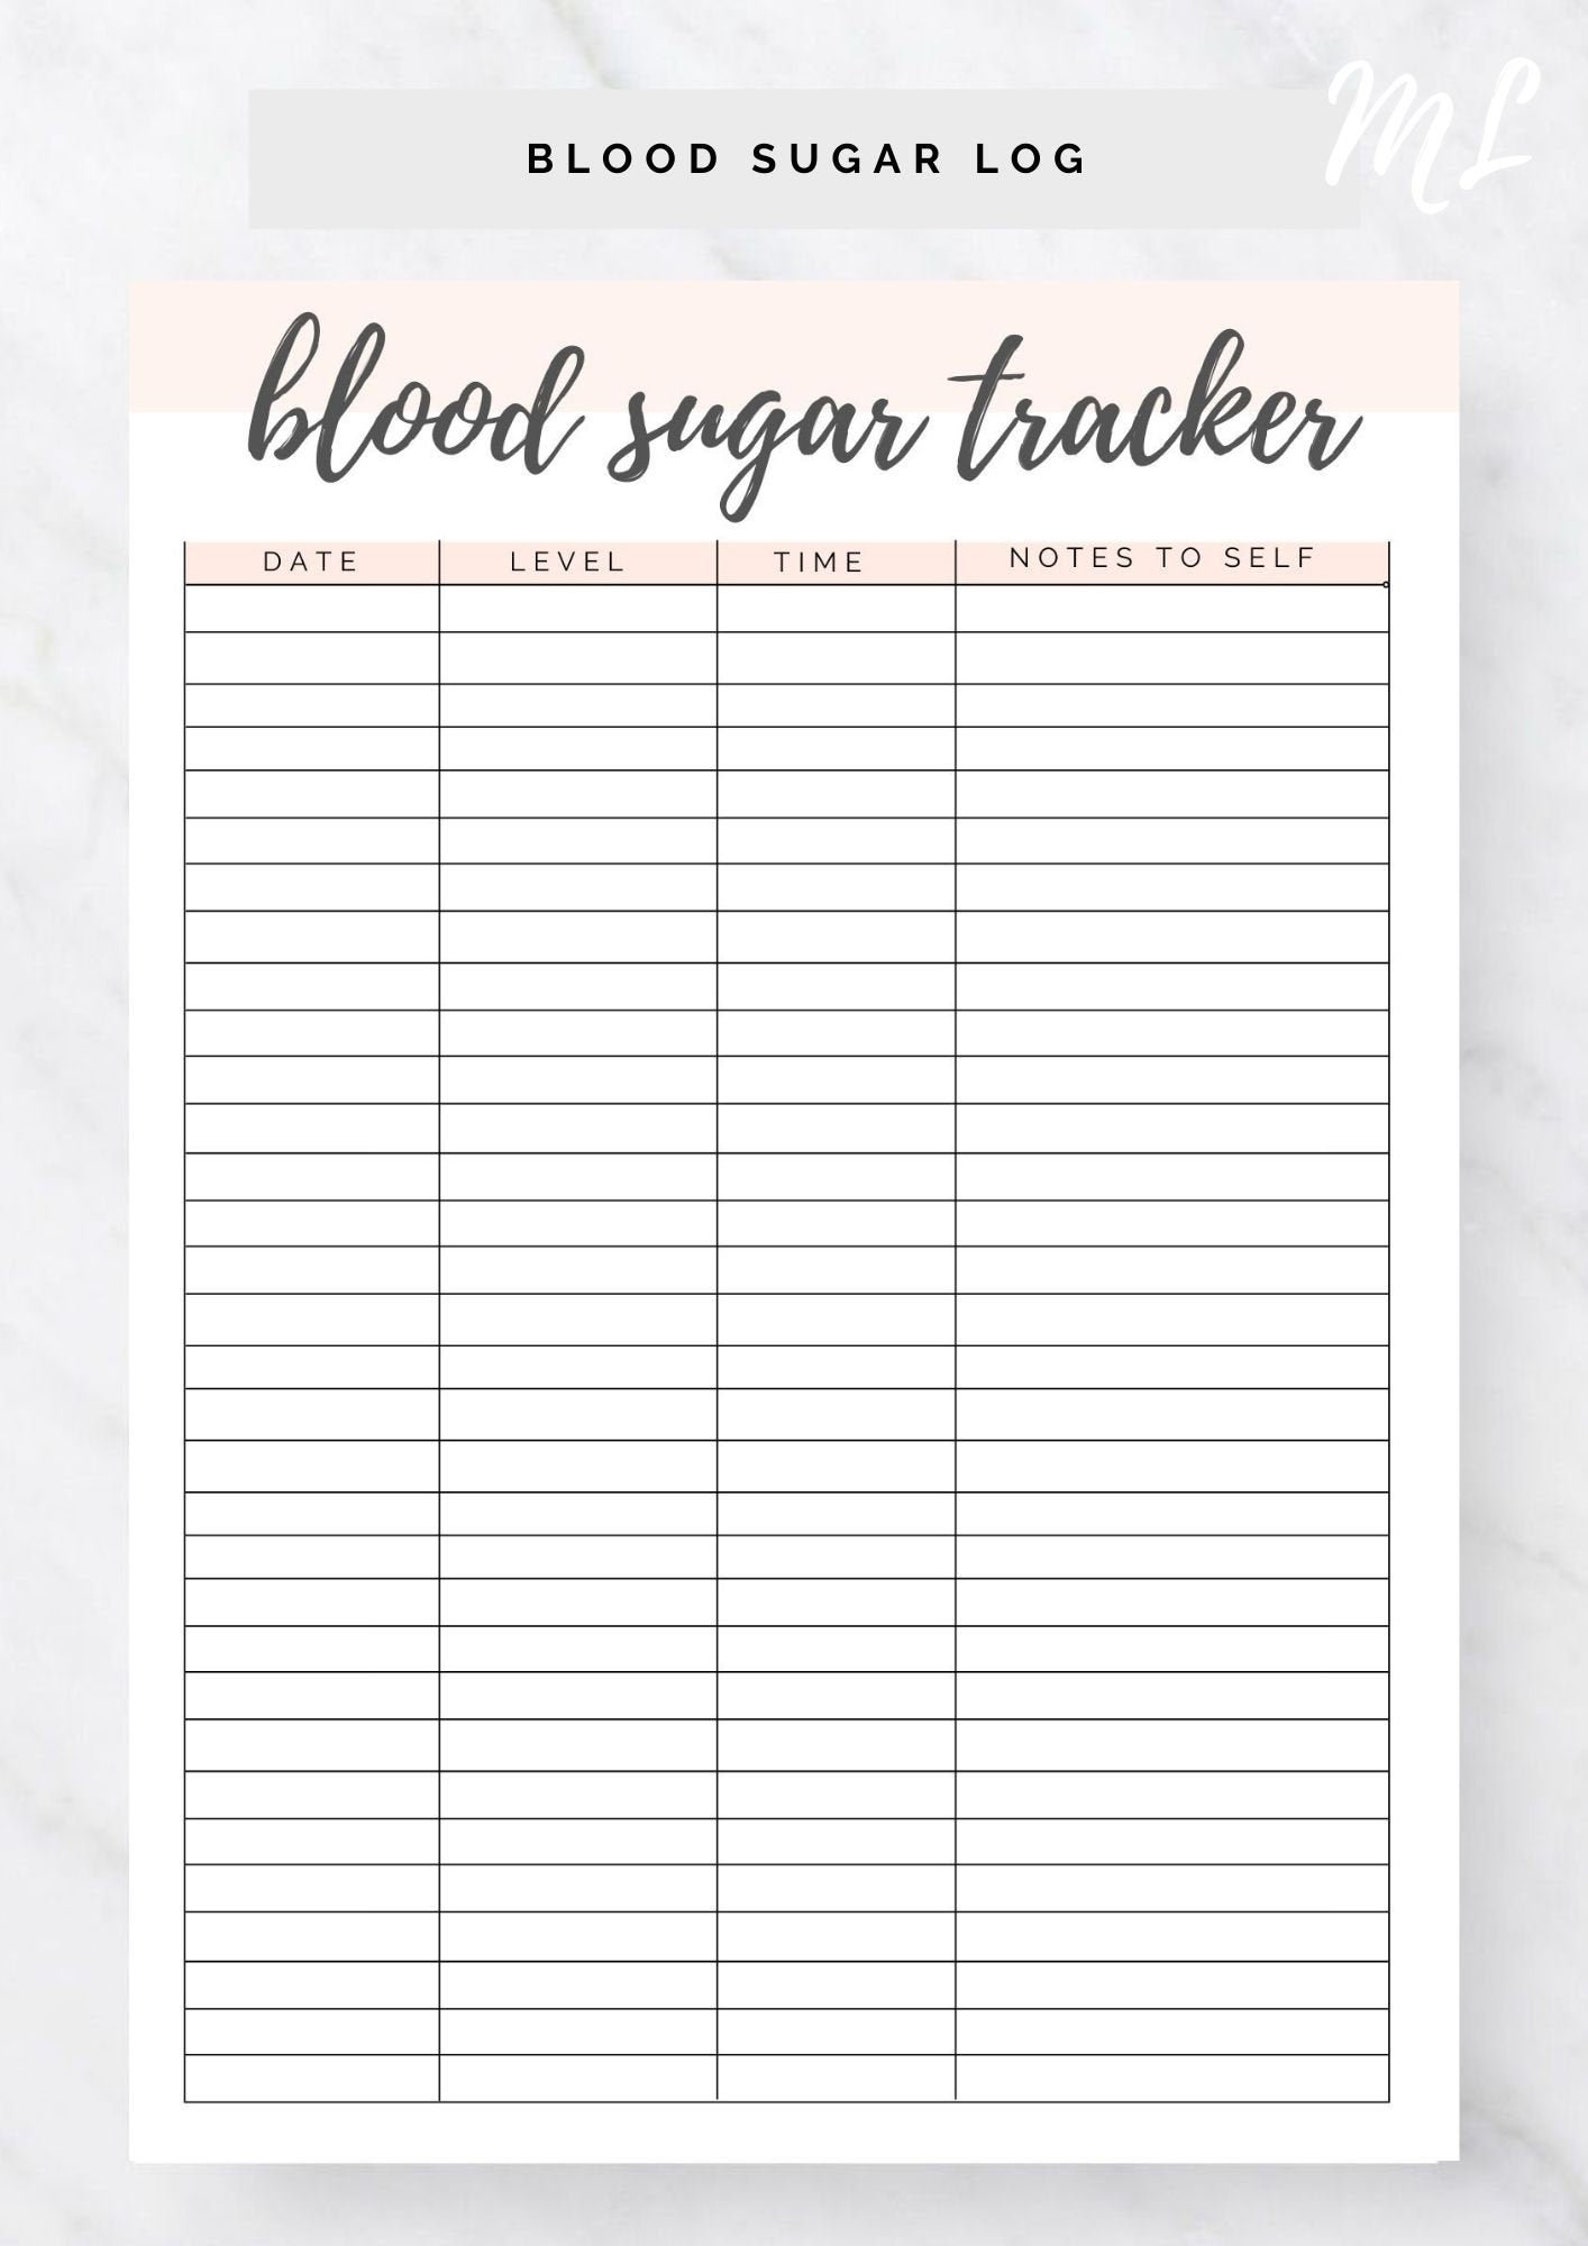 ms-excel-blood-sugar-tracker-printable-medical-forms-letters-sheets